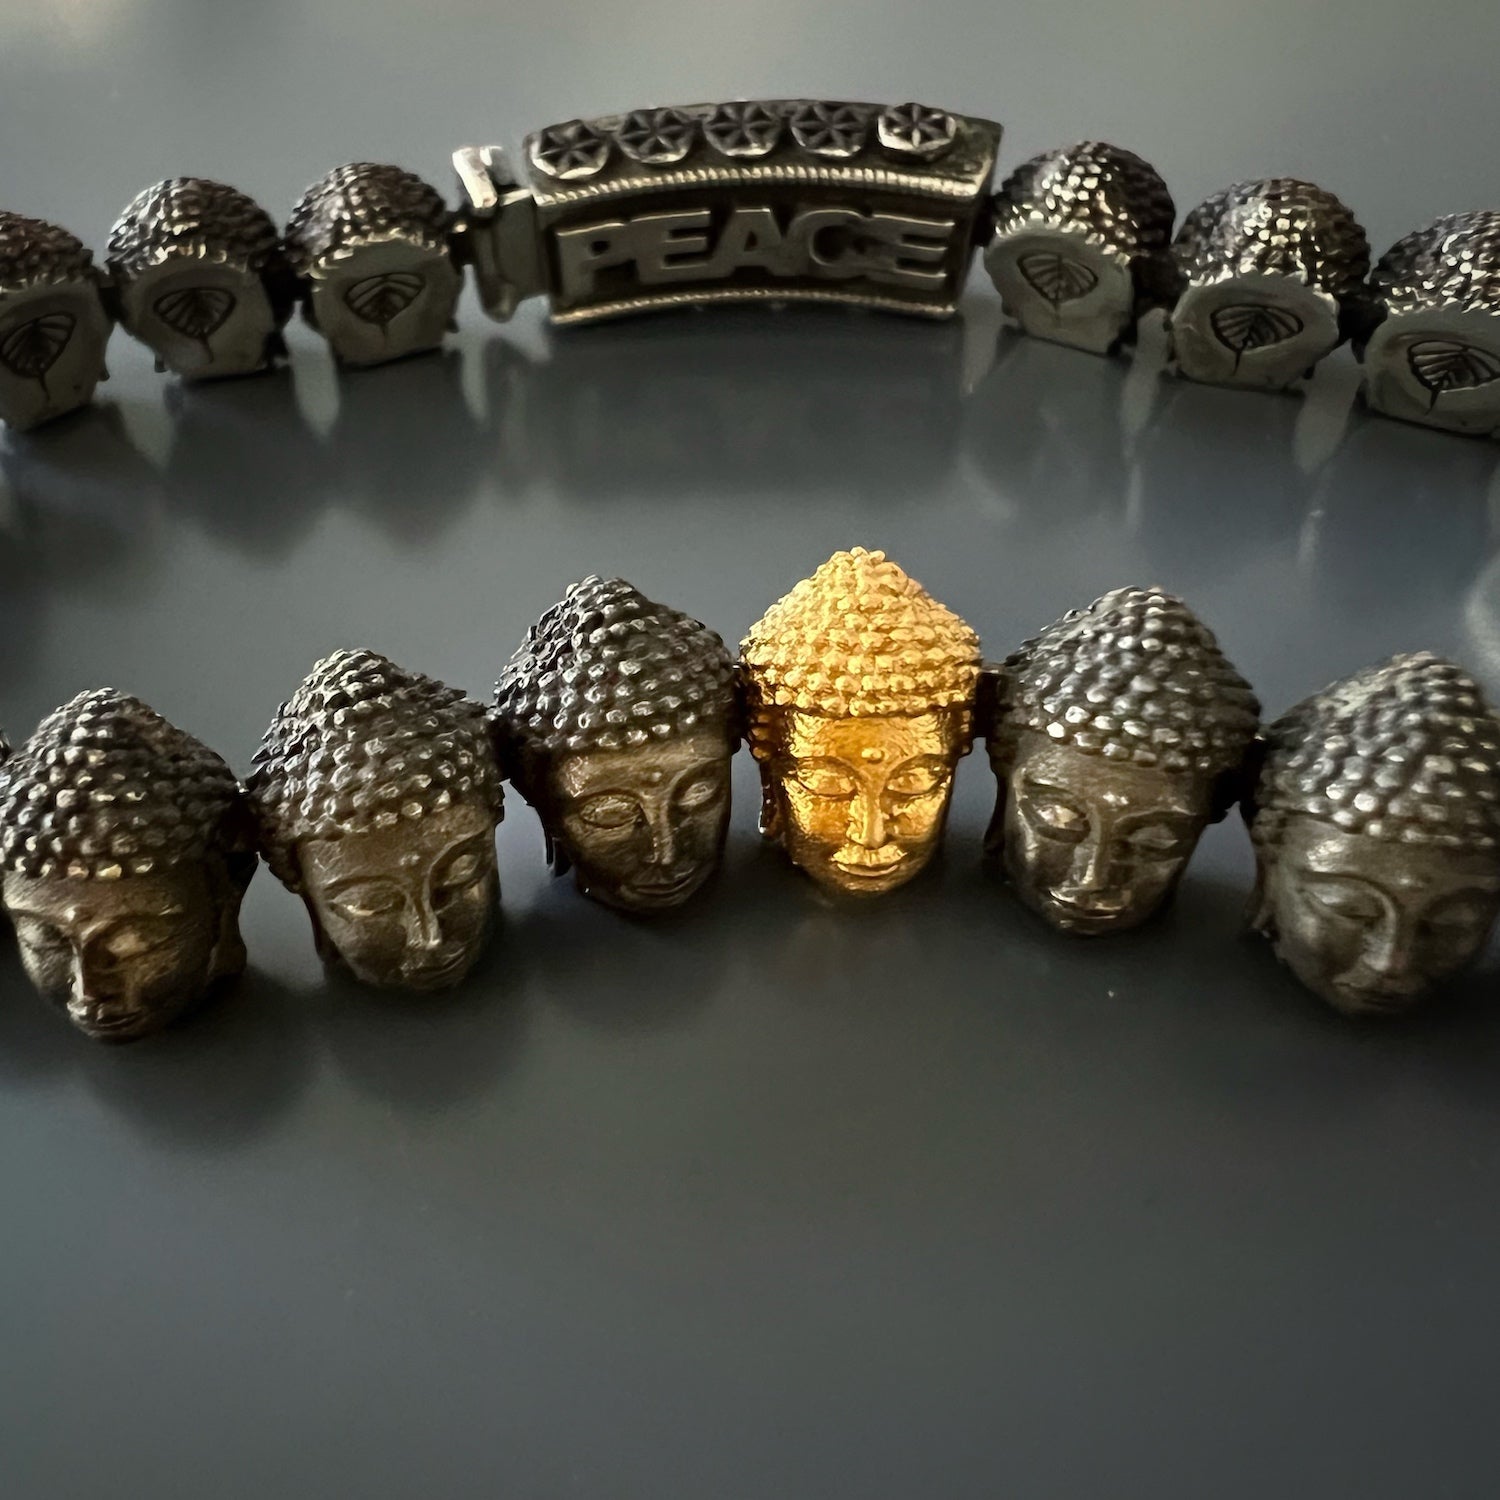 Purity and Luxury - Gold Lotus Silver Buddha Bracelet with Blue Diamonds.